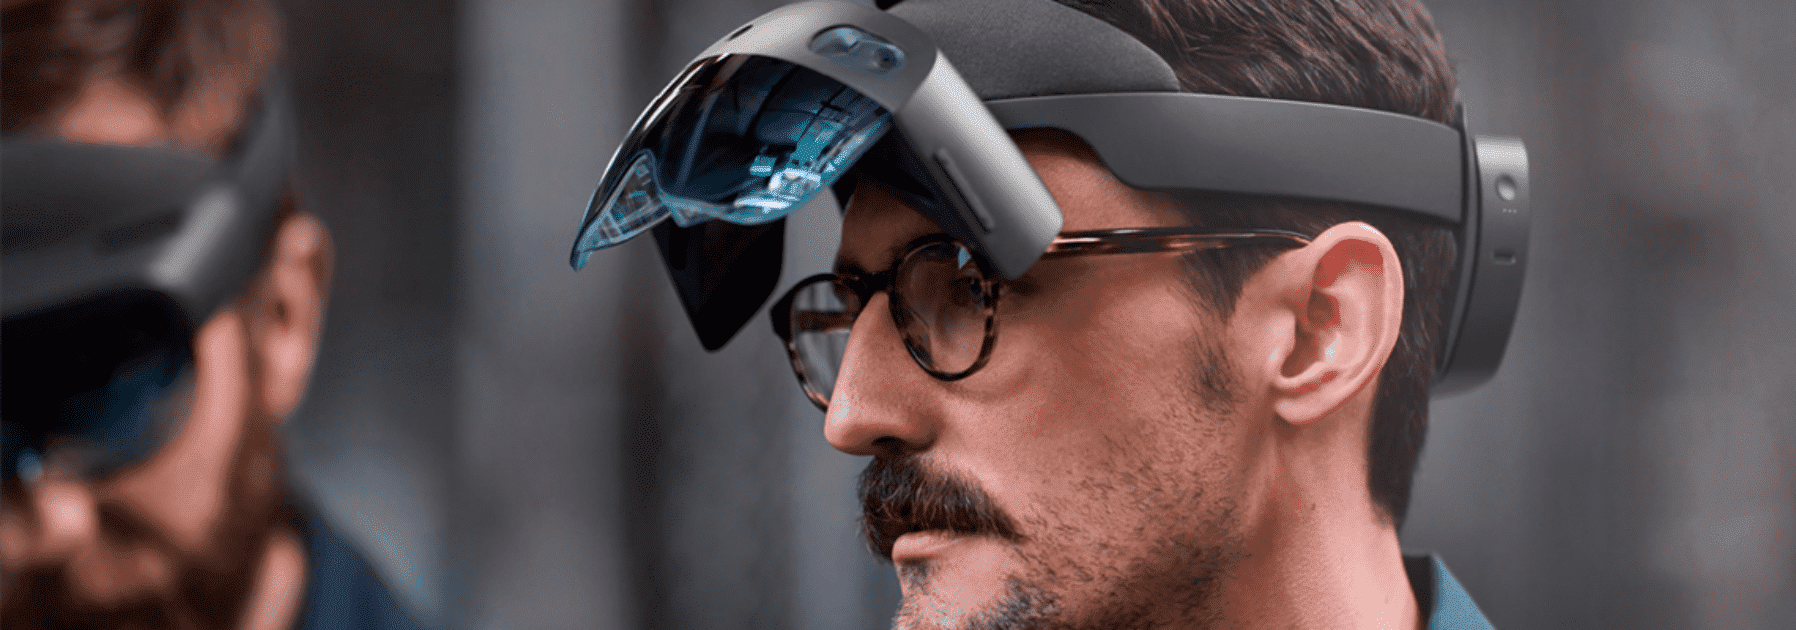 Overview on Microsoft HoloLens 2